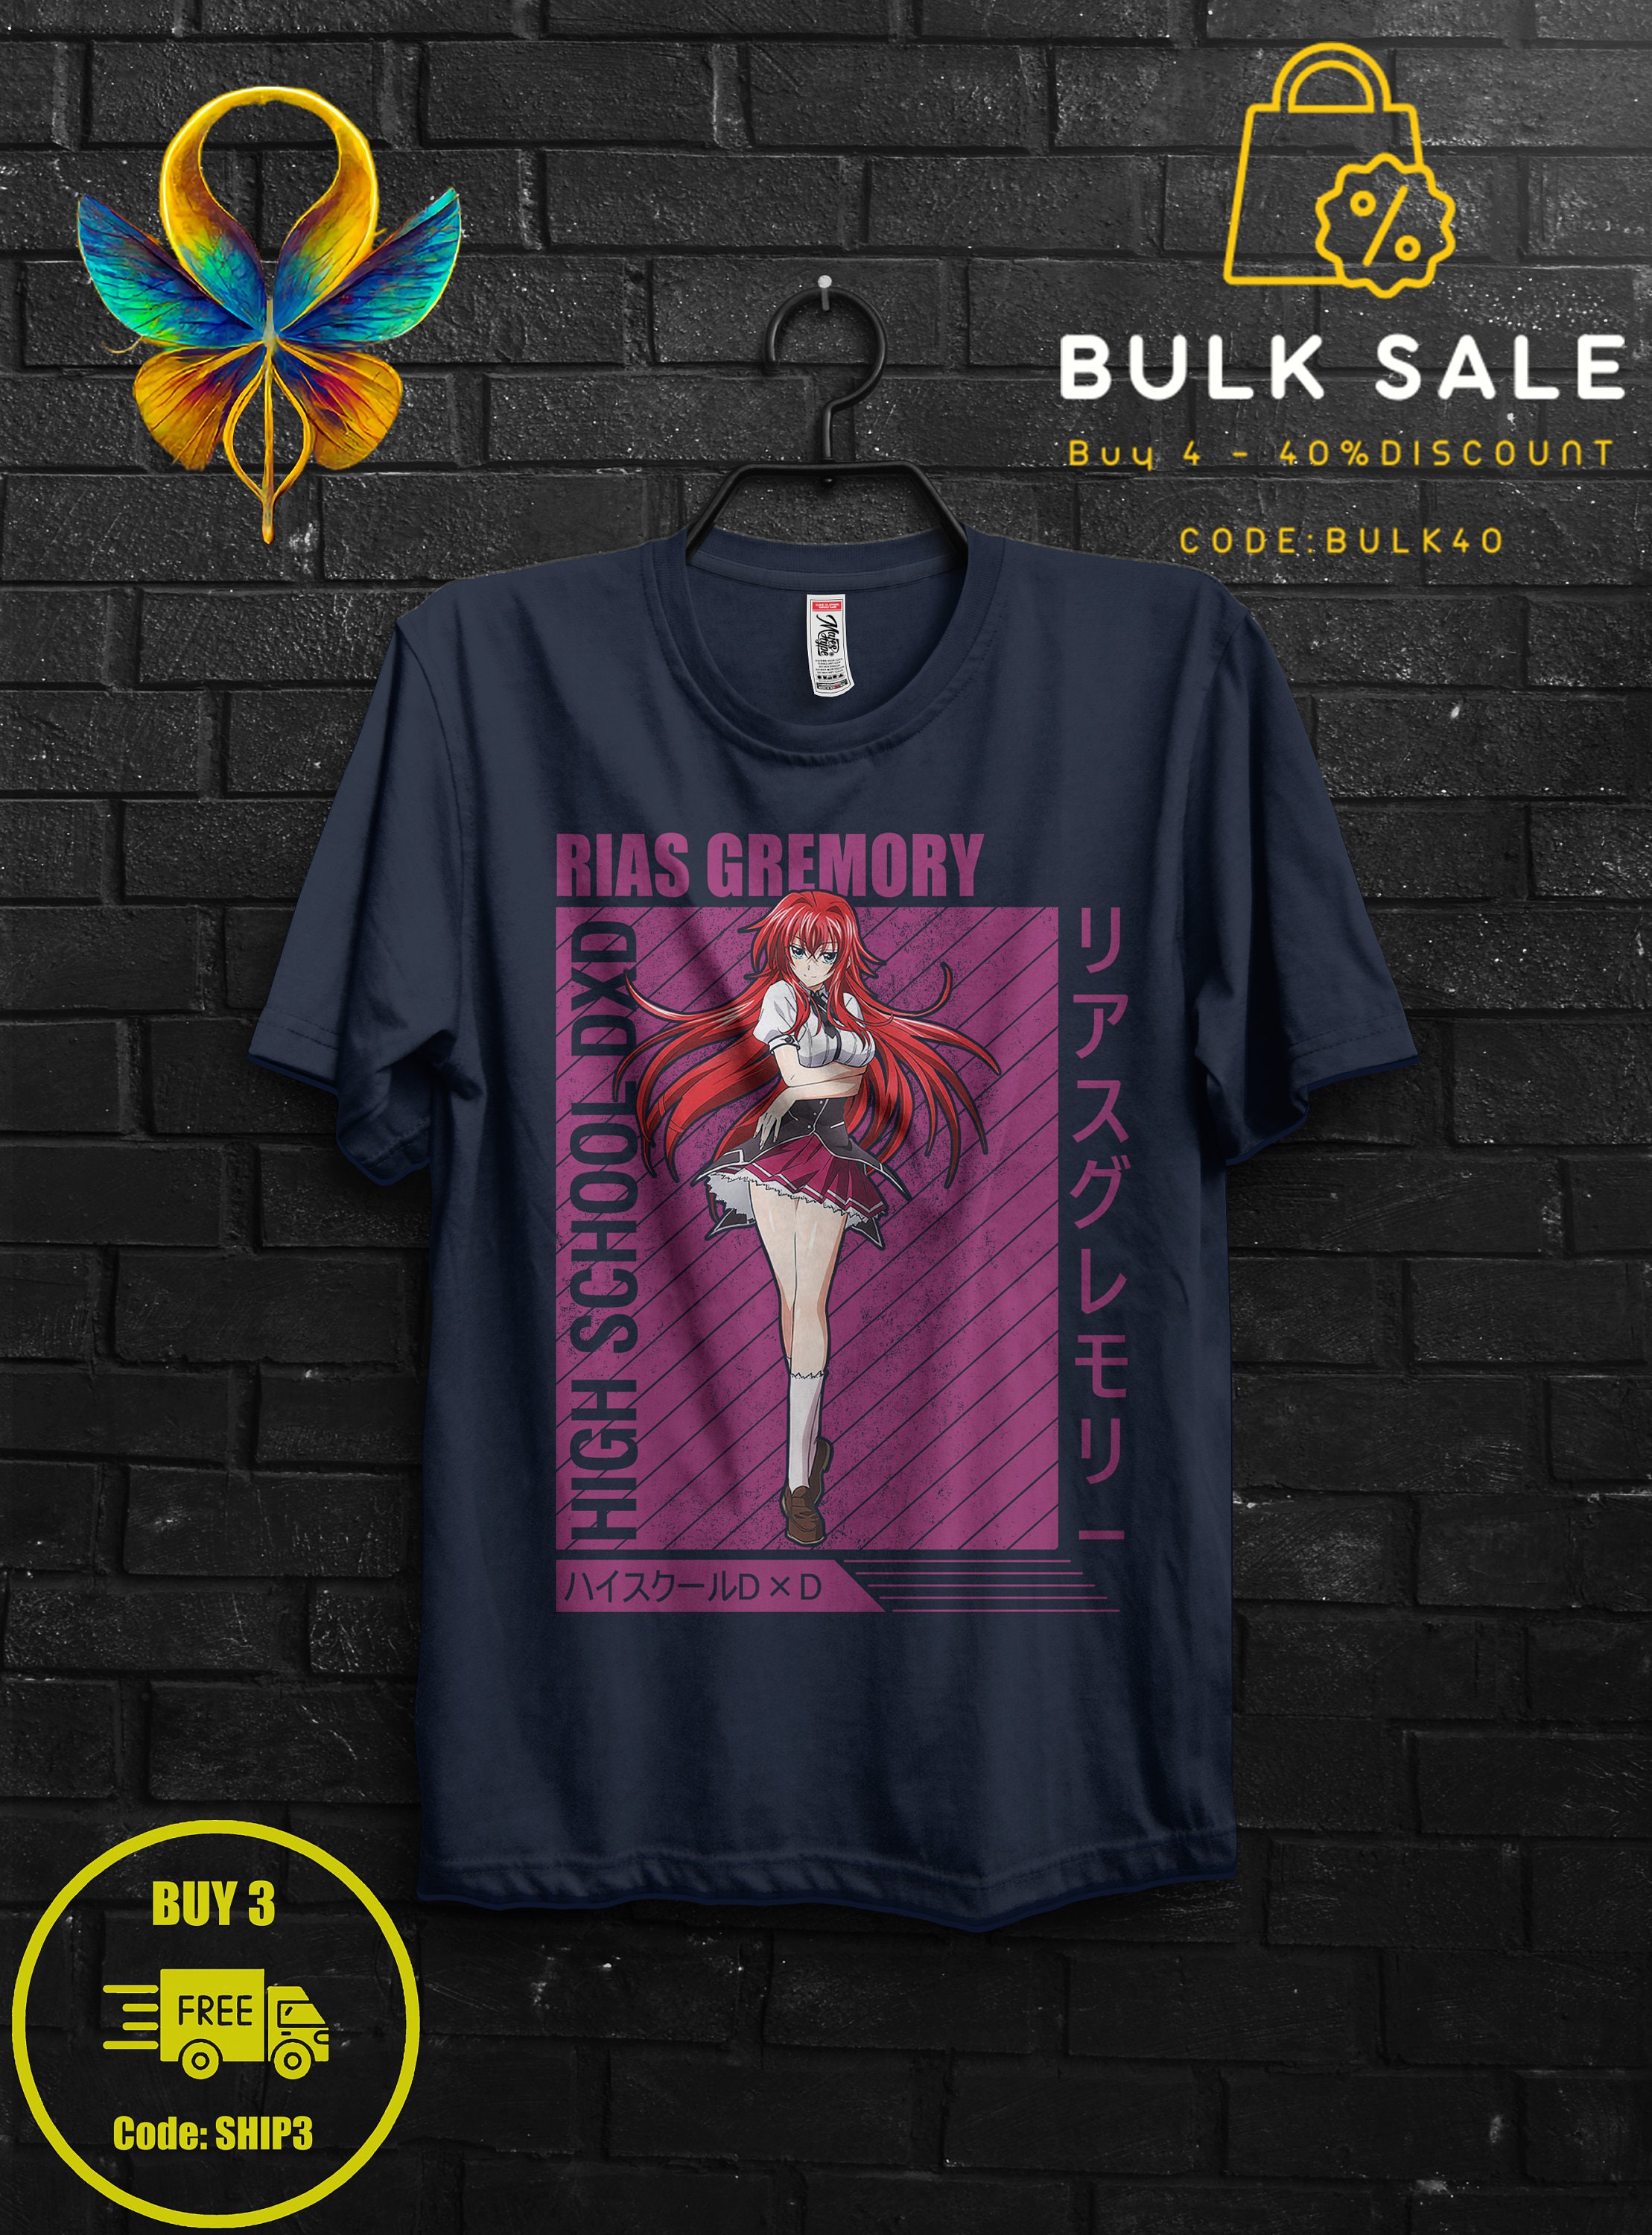 Rias Gremory Shirt Anime Gift Cosplay For Girl,Rossweisse Tshirt For Her,Xenovia Appareal For Sitri,Issei Hyoudou Sweat,High School DxD Tee 1600251443